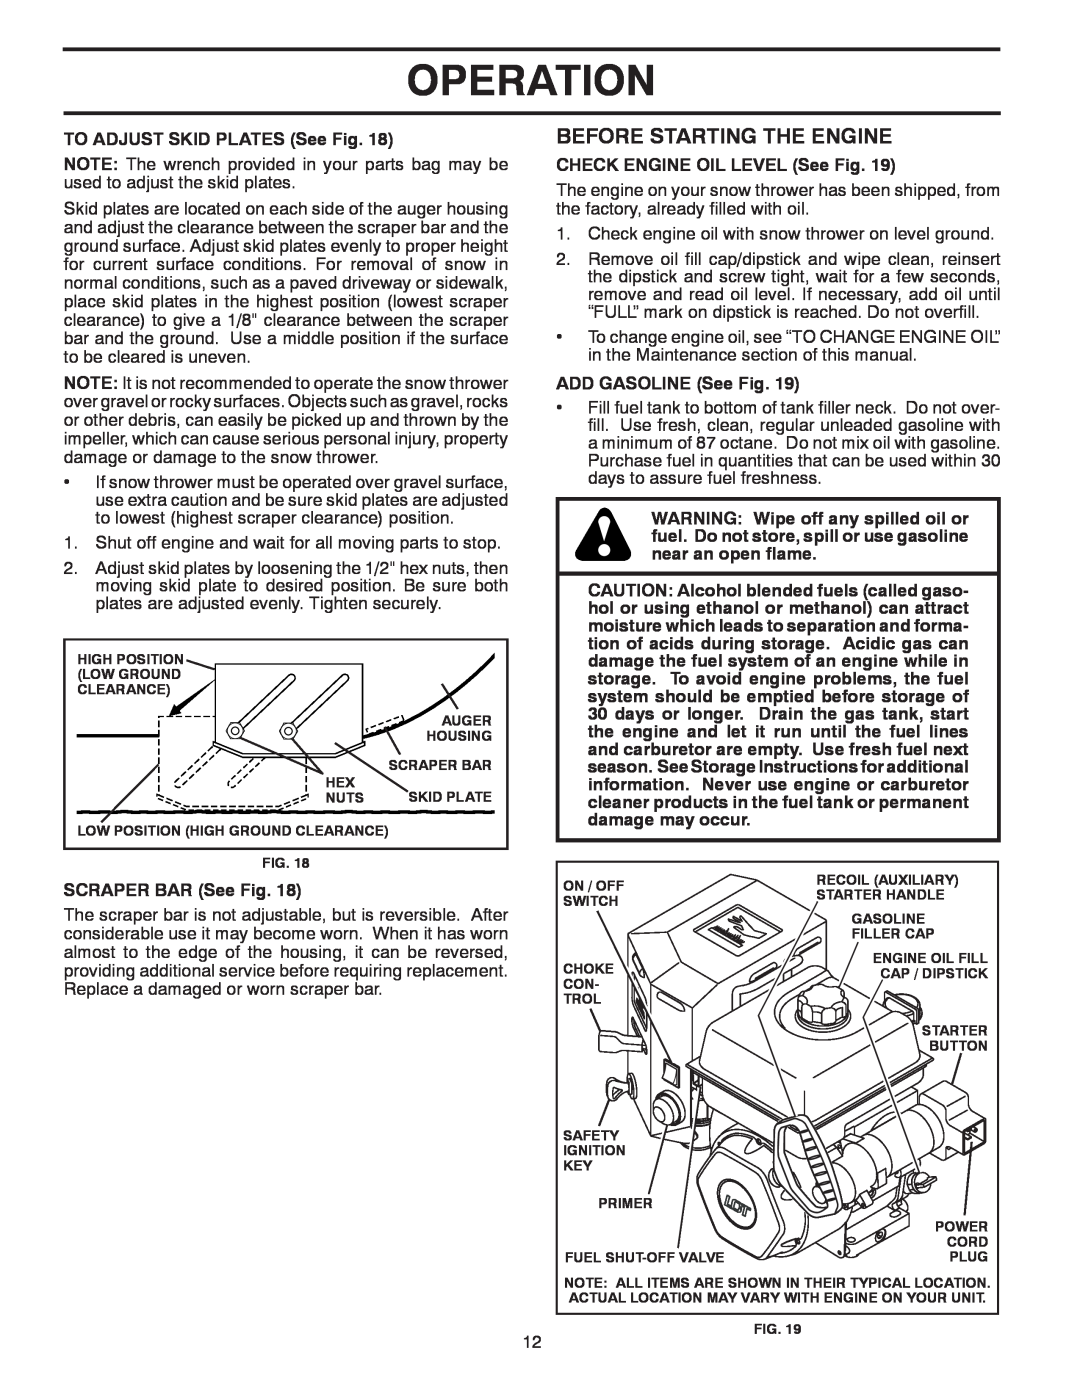 Poulan 429924, 96192003101 Before Starting The Engine, Operation, TO ADJUST SKID PLATES See Fig, SCRAPER BAR See Fig 